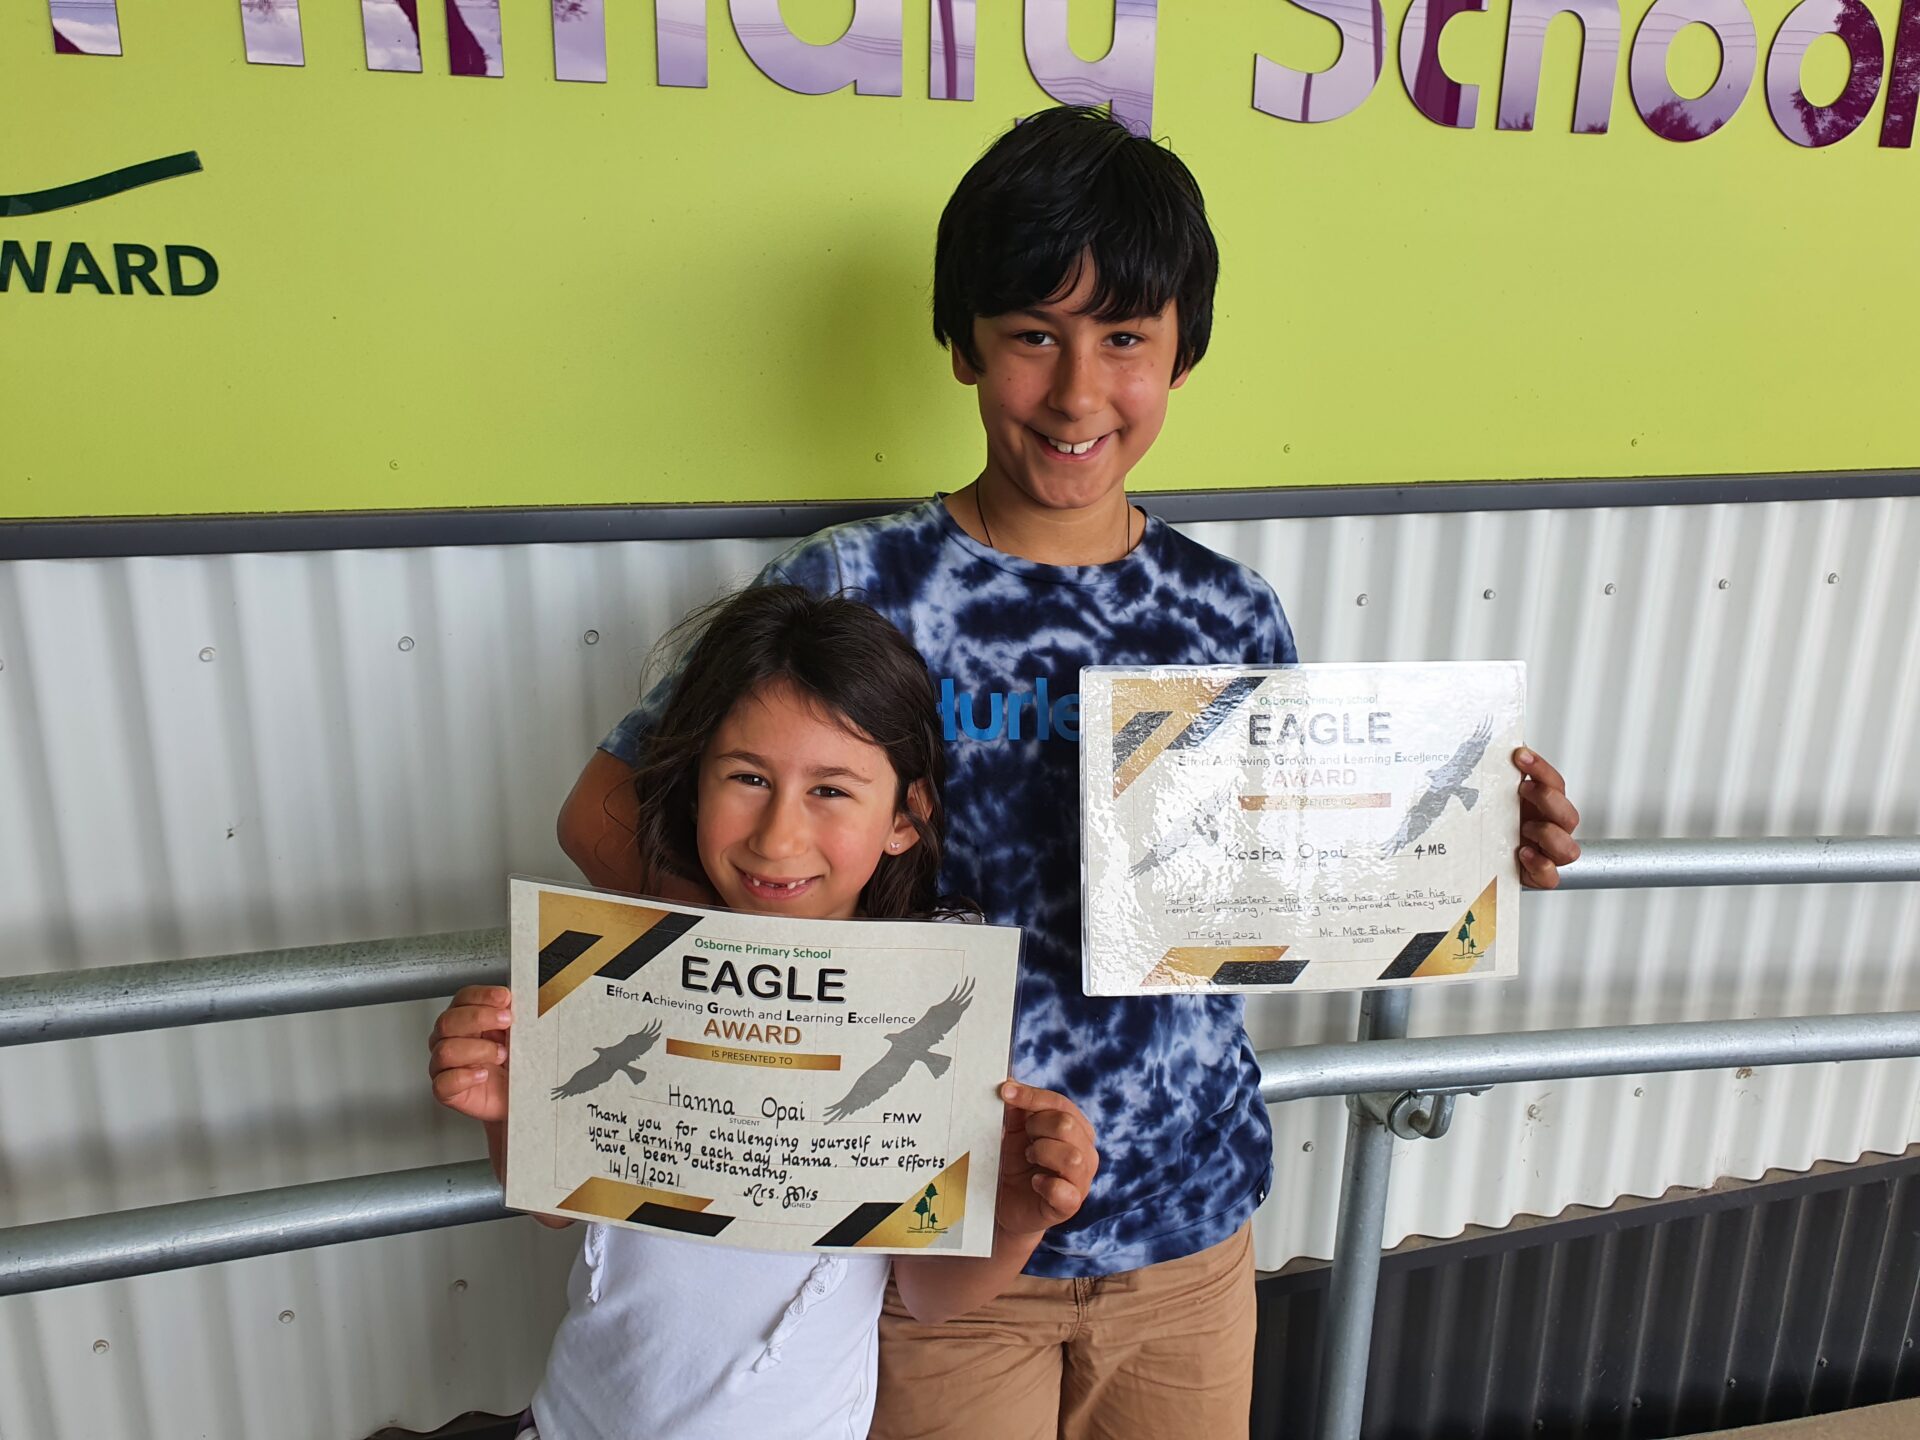 A brother and sister with dark brown hair and caucasian skin holding certificates